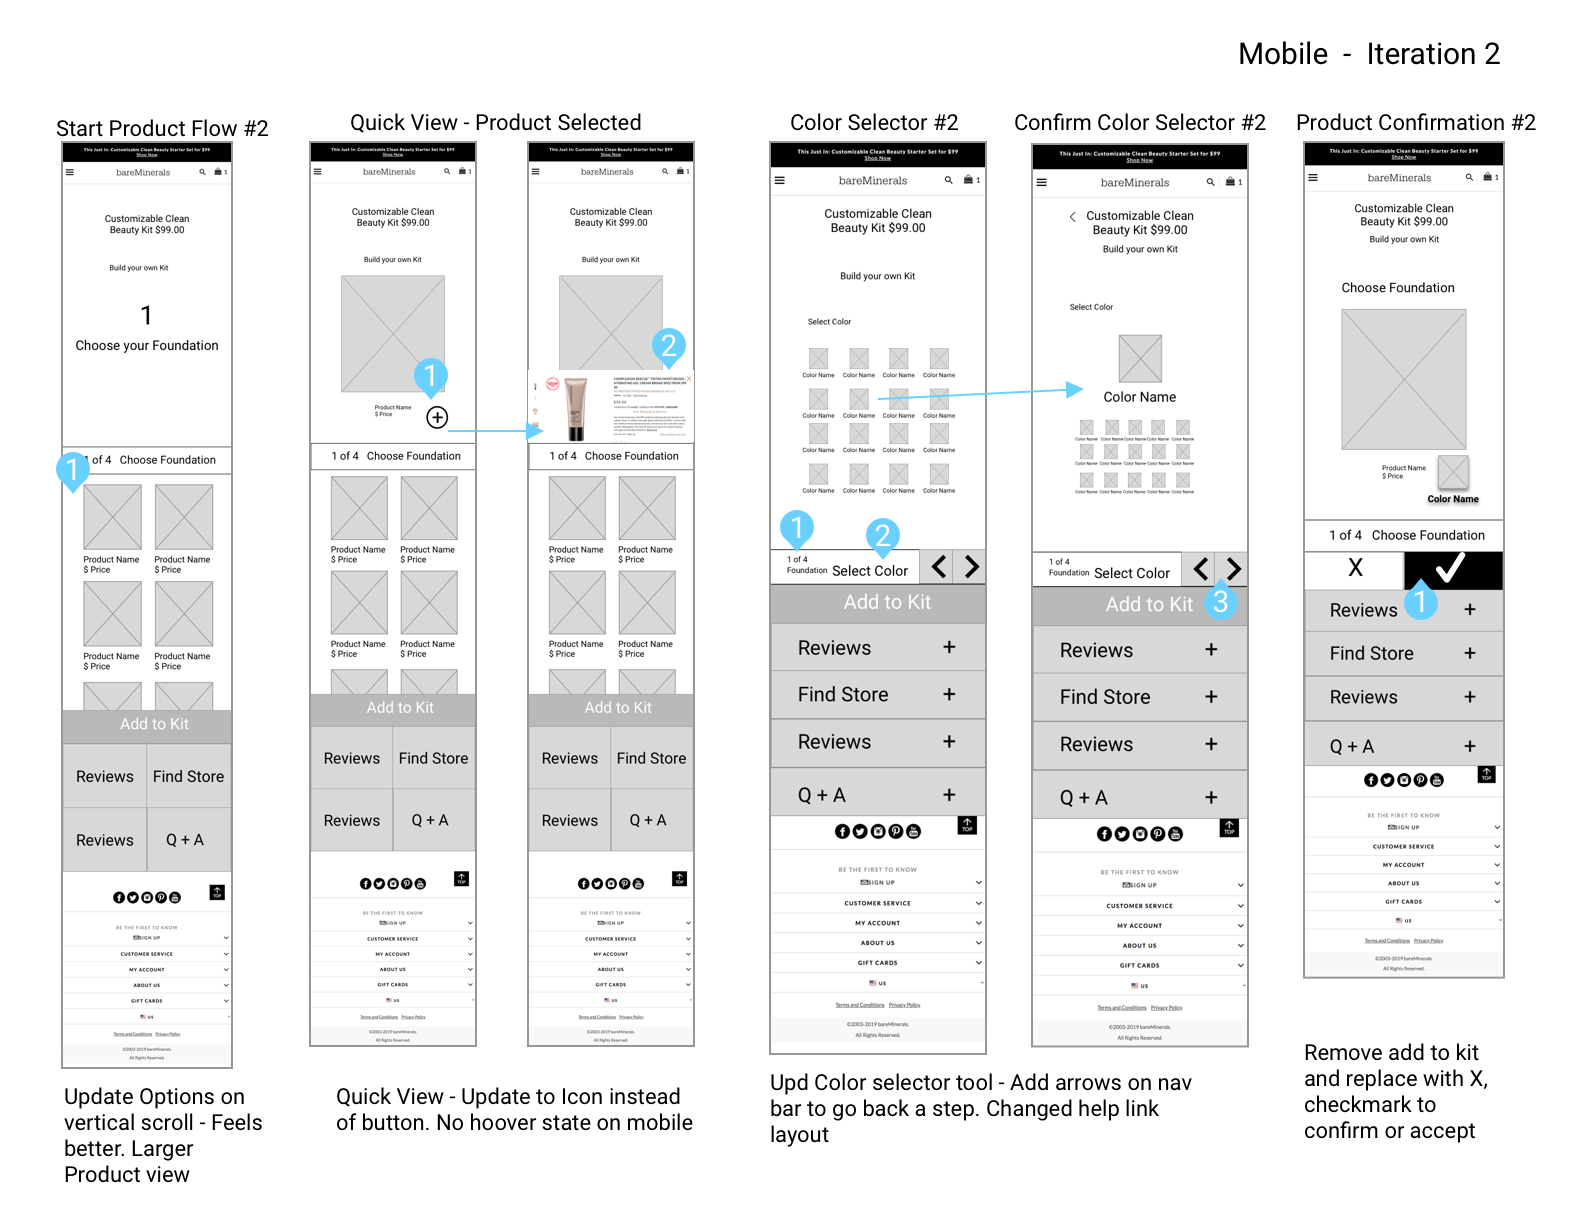 Bare Minerals - Mobile Wireframes - Iteration 2